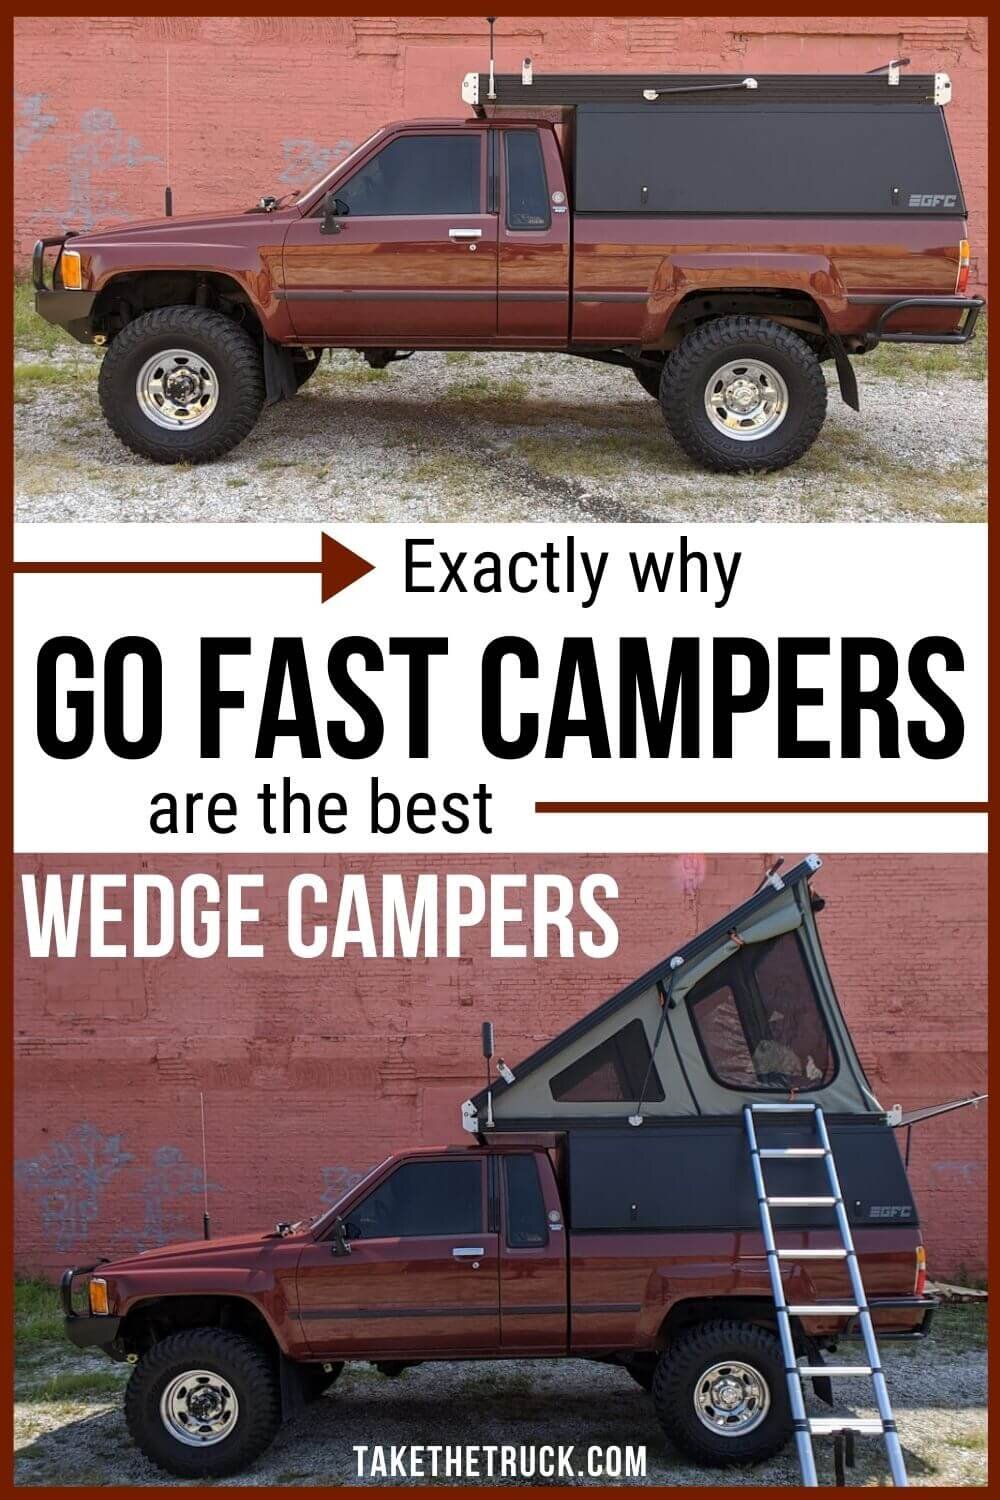 We upped our truck bed camping game and got a wedge truck camper! Check out this post for 5 reasons we went with Go Fast Campers when wanting to upgrade to a wedge camper for our Toyota.